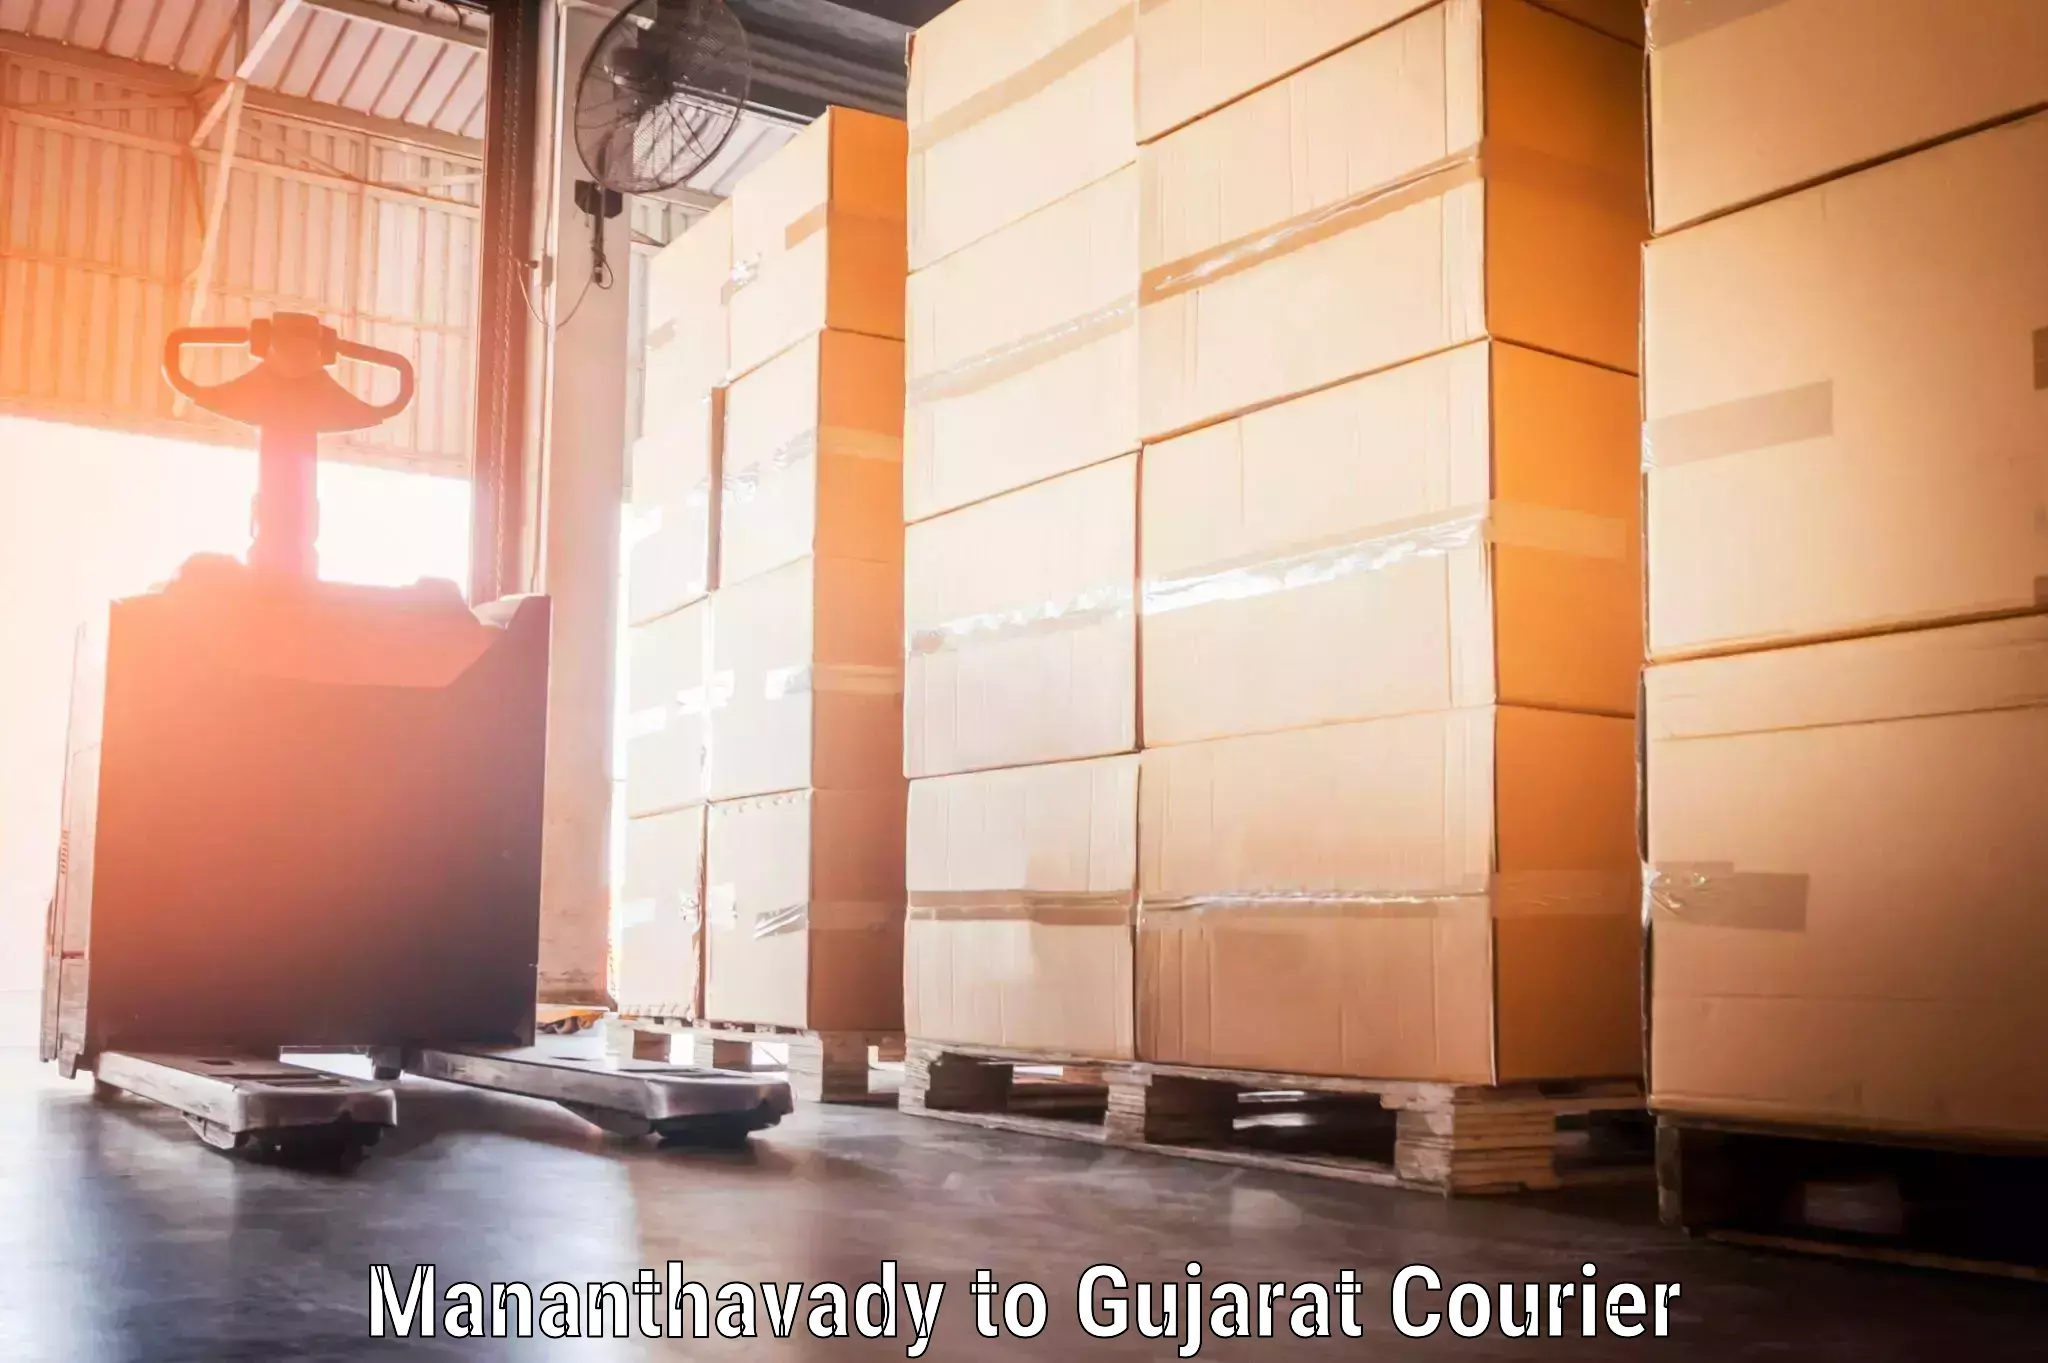 Baggage transport network in Mananthavady to Gujarat